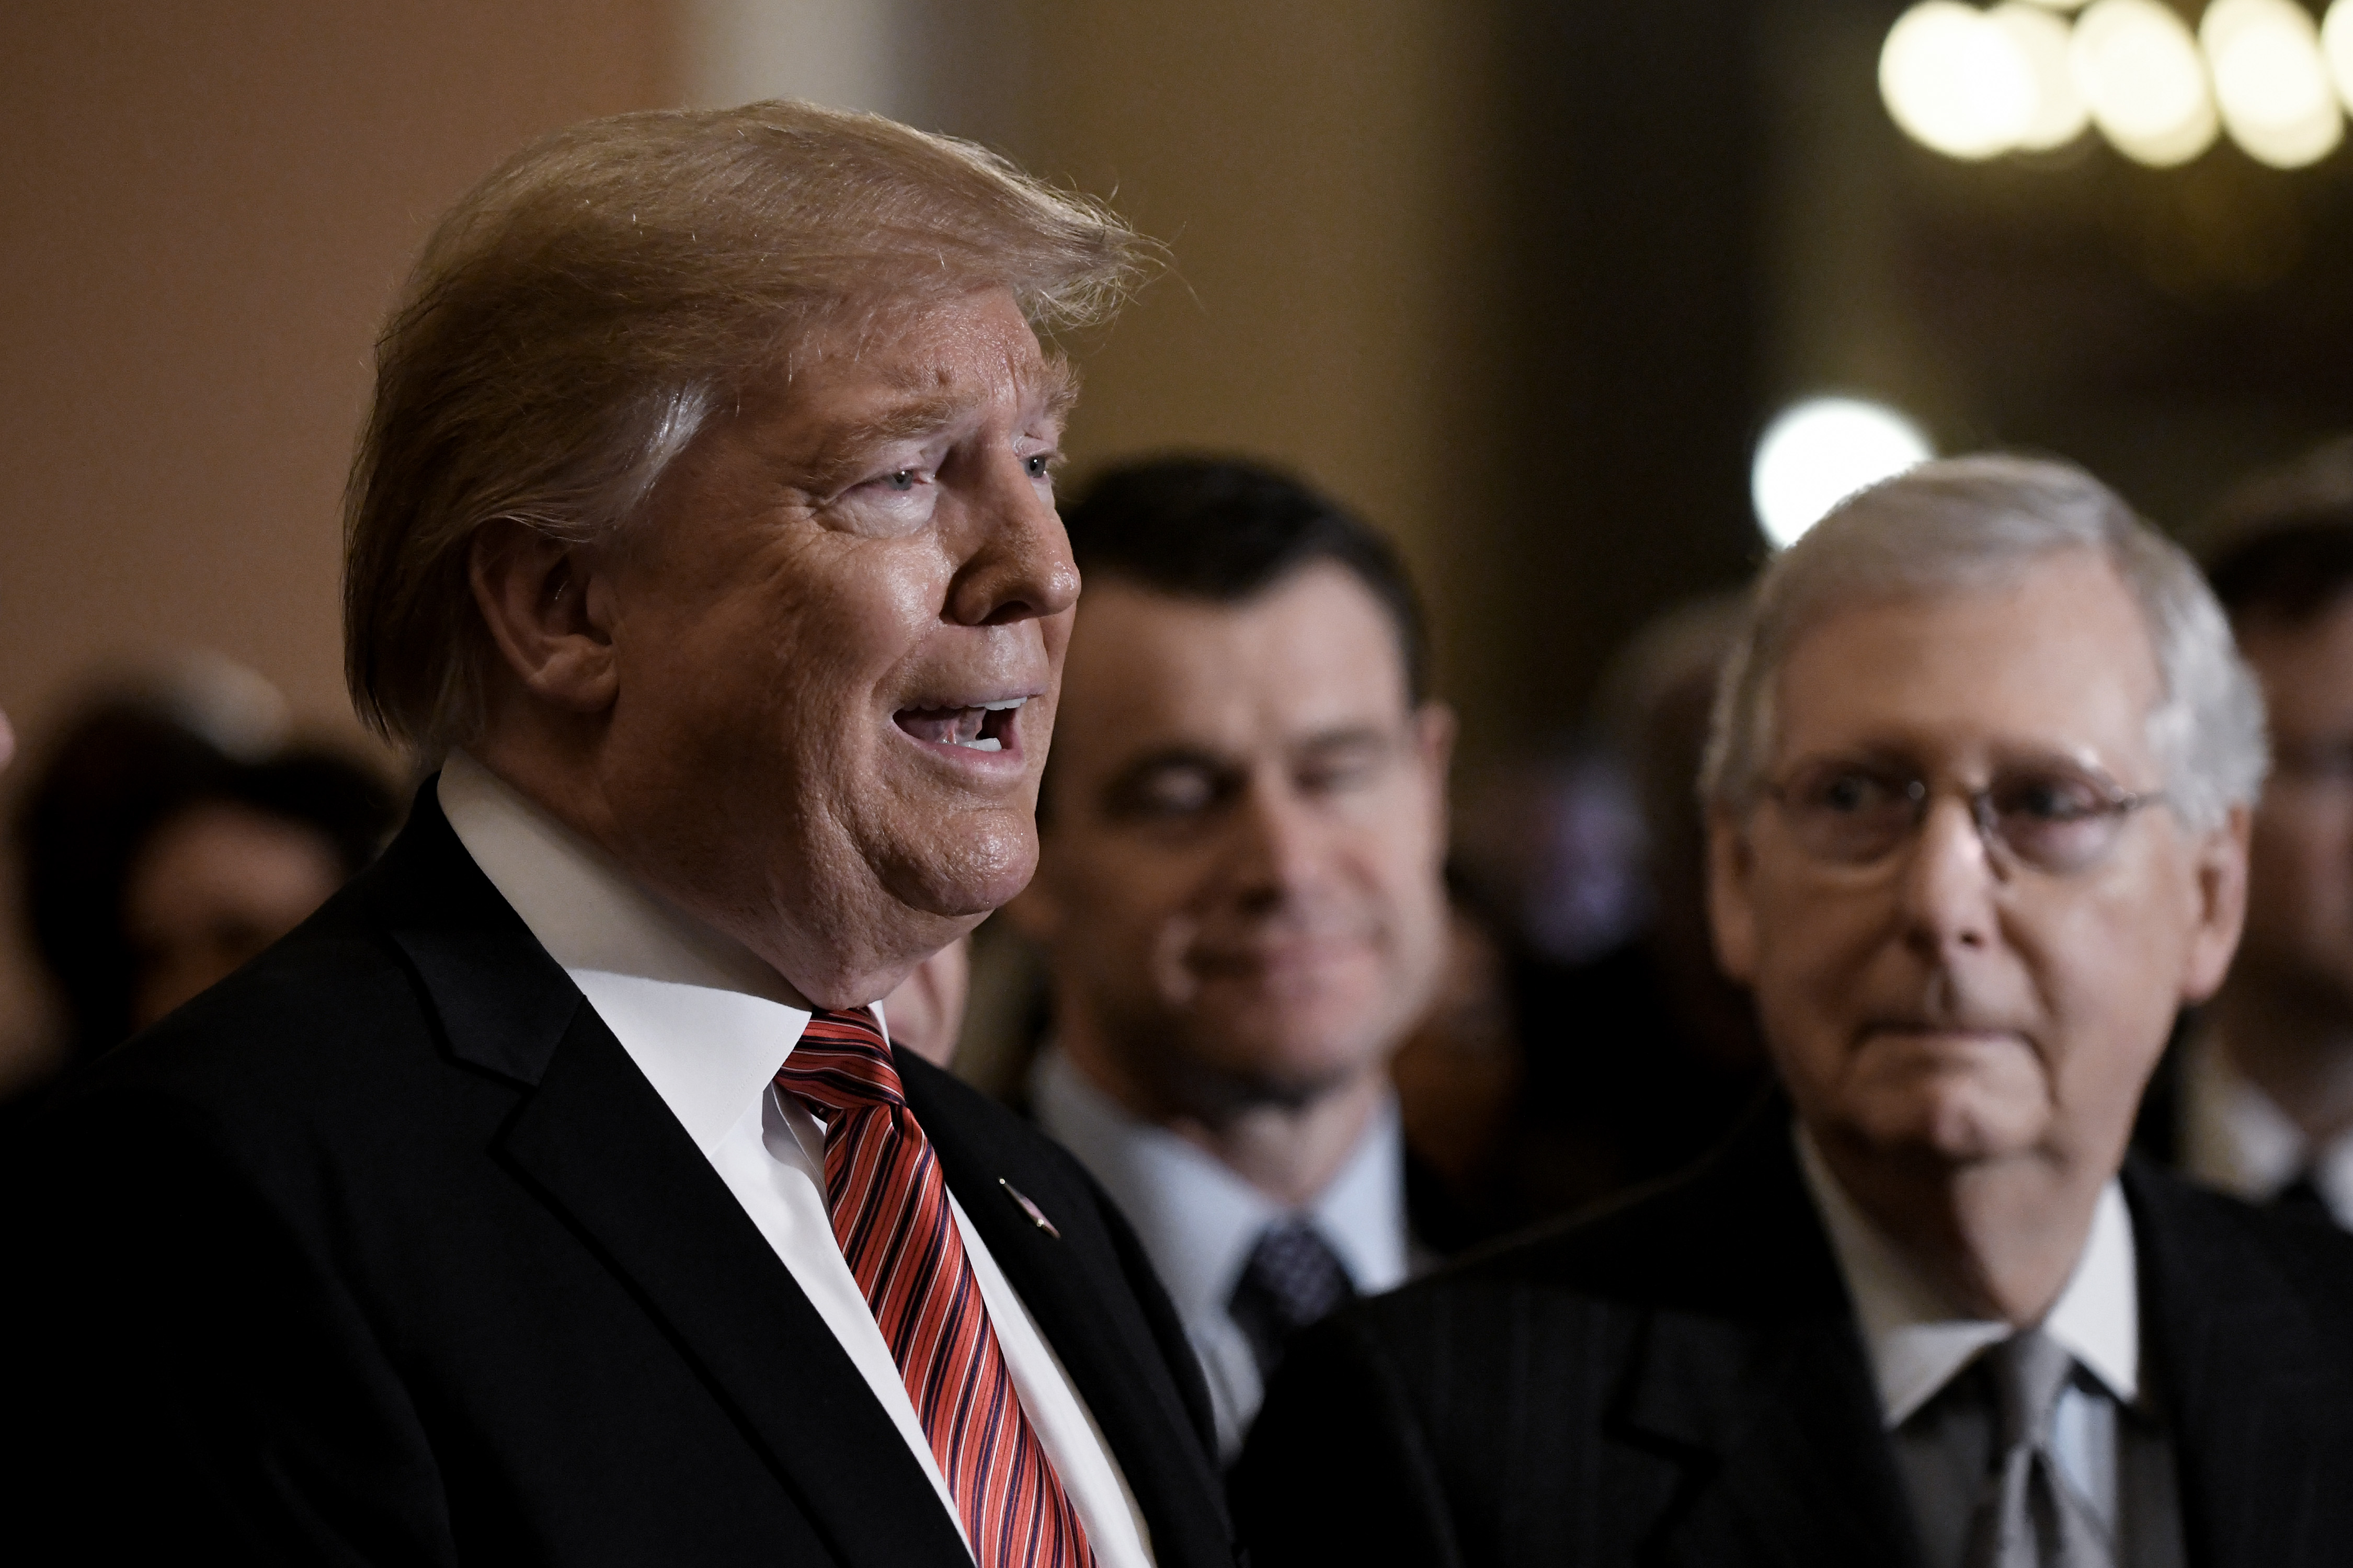 President Donald Trump talks to the press as Senate Majority Leader Mitch McConnell (R-KY) looks on.